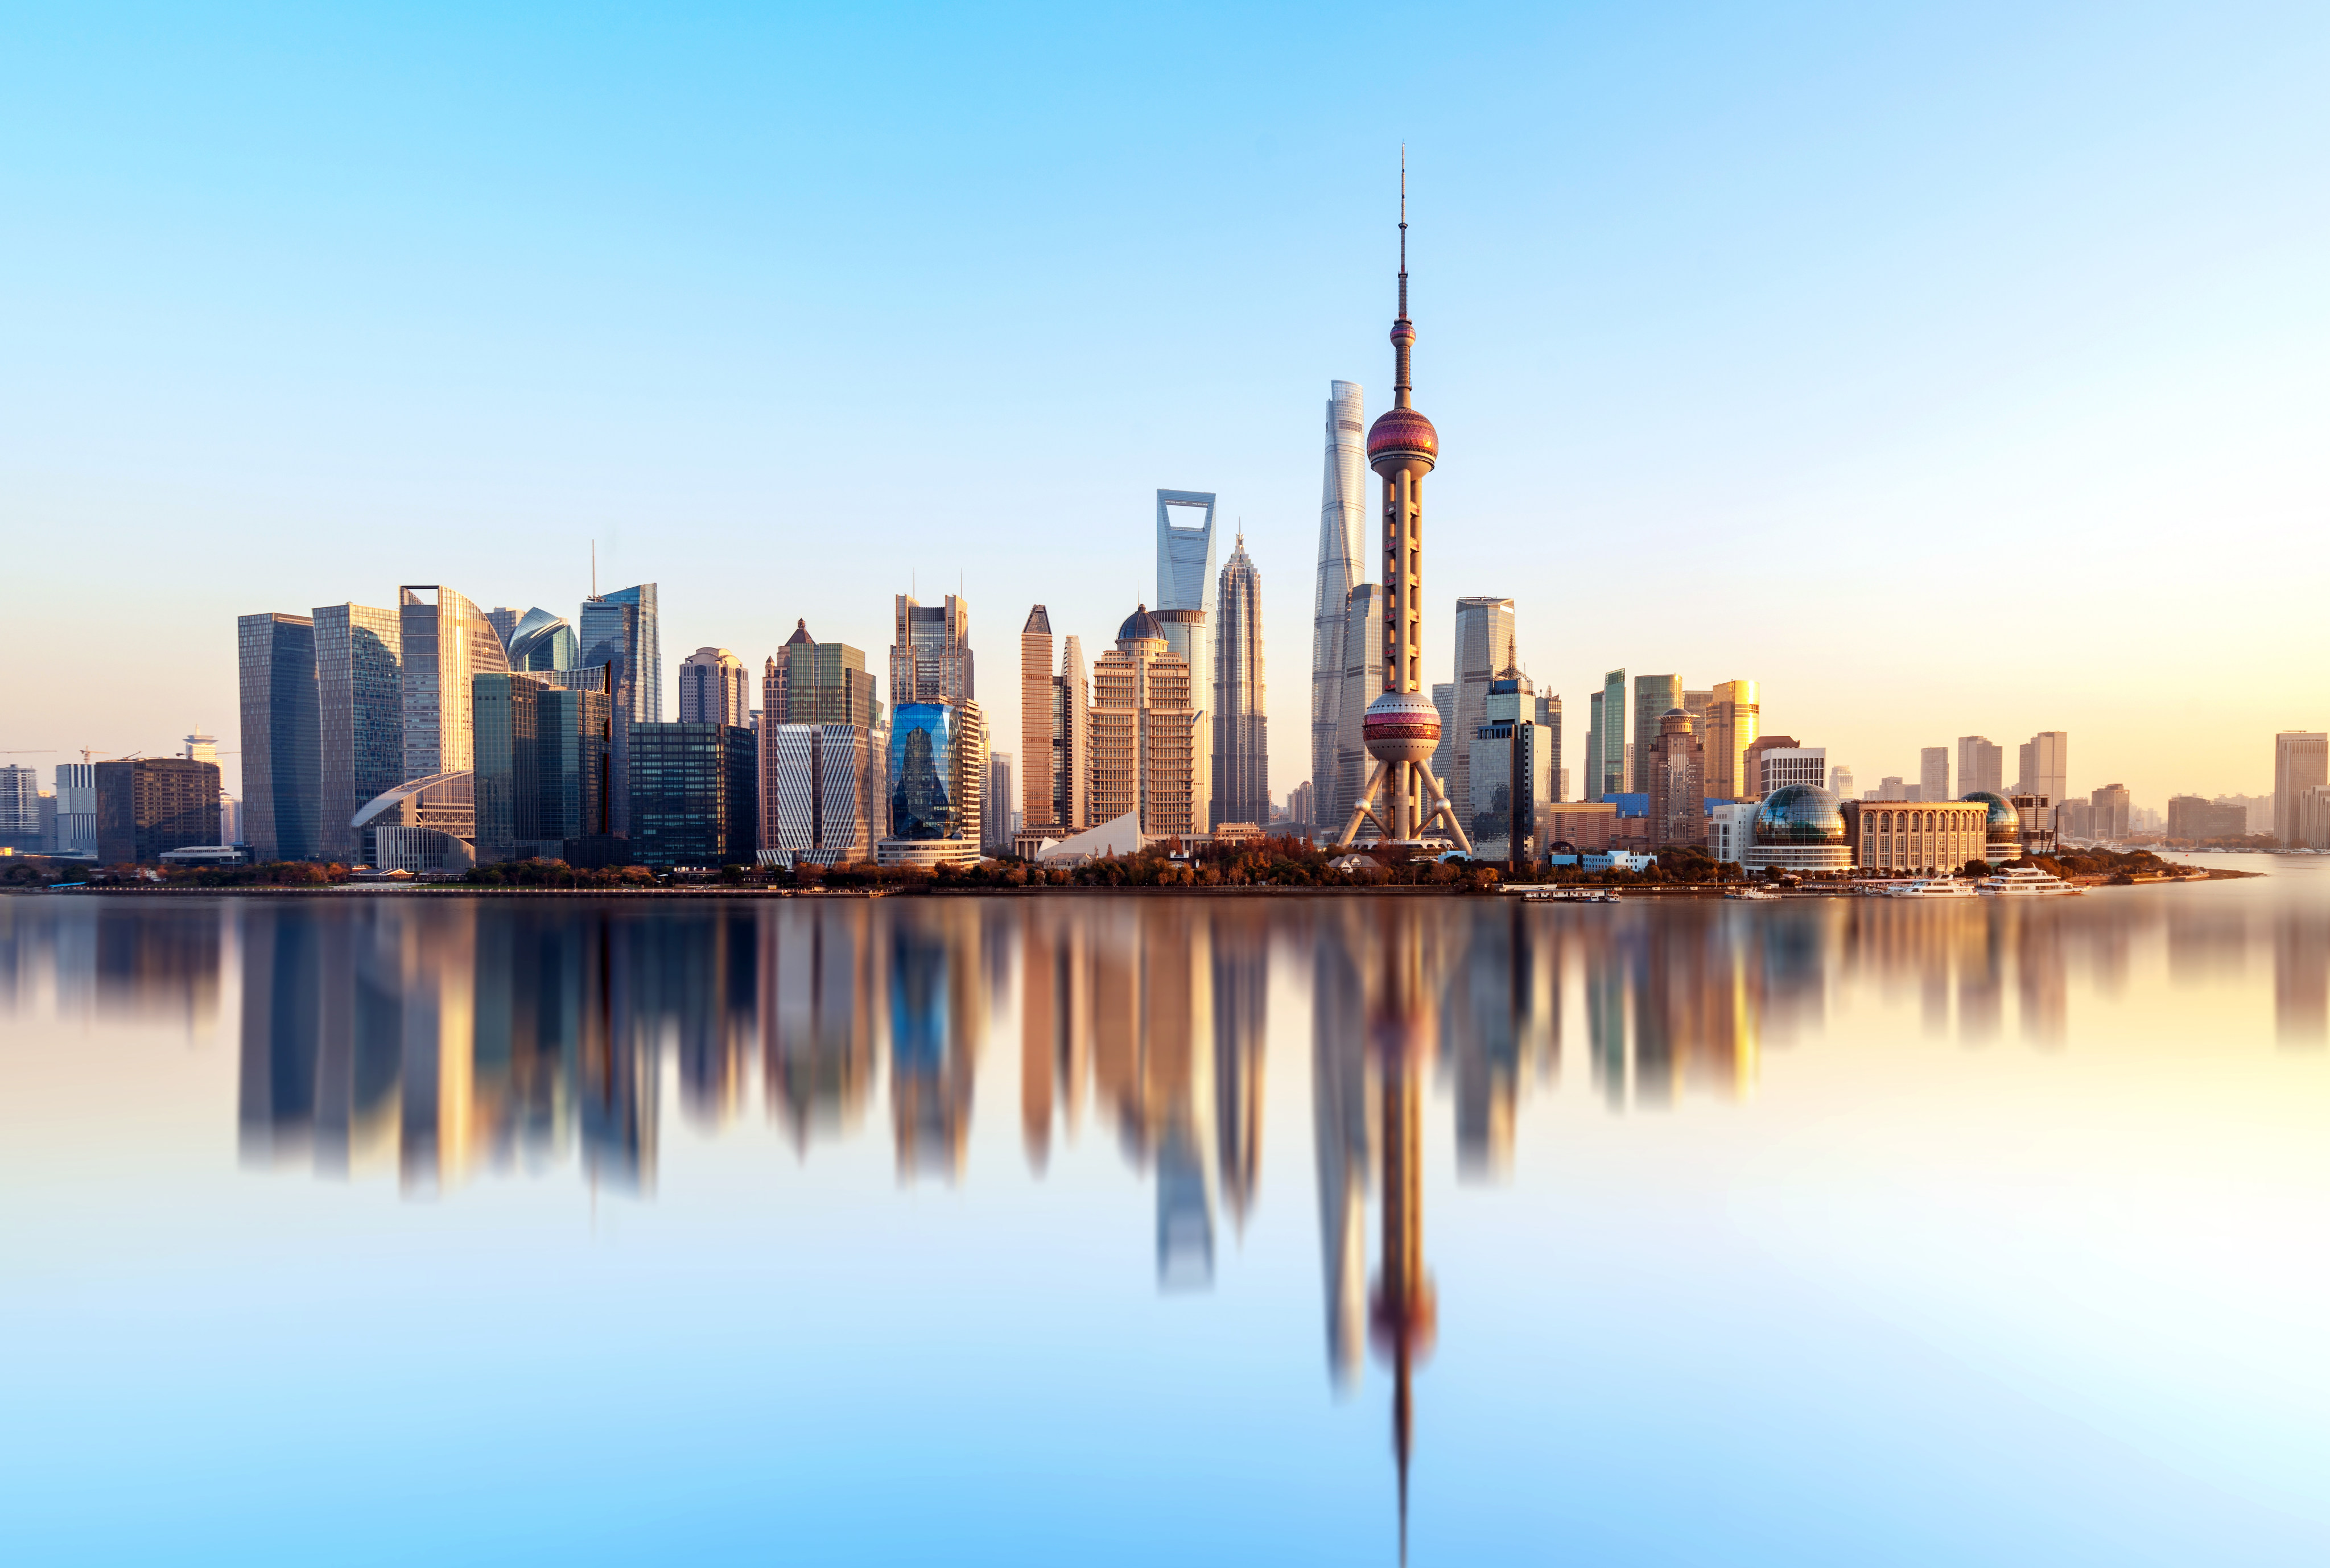 The Shanghai municipal government is now studying new policies to address the problems faced by the city’s many small businesses. Photo: Shutterstock